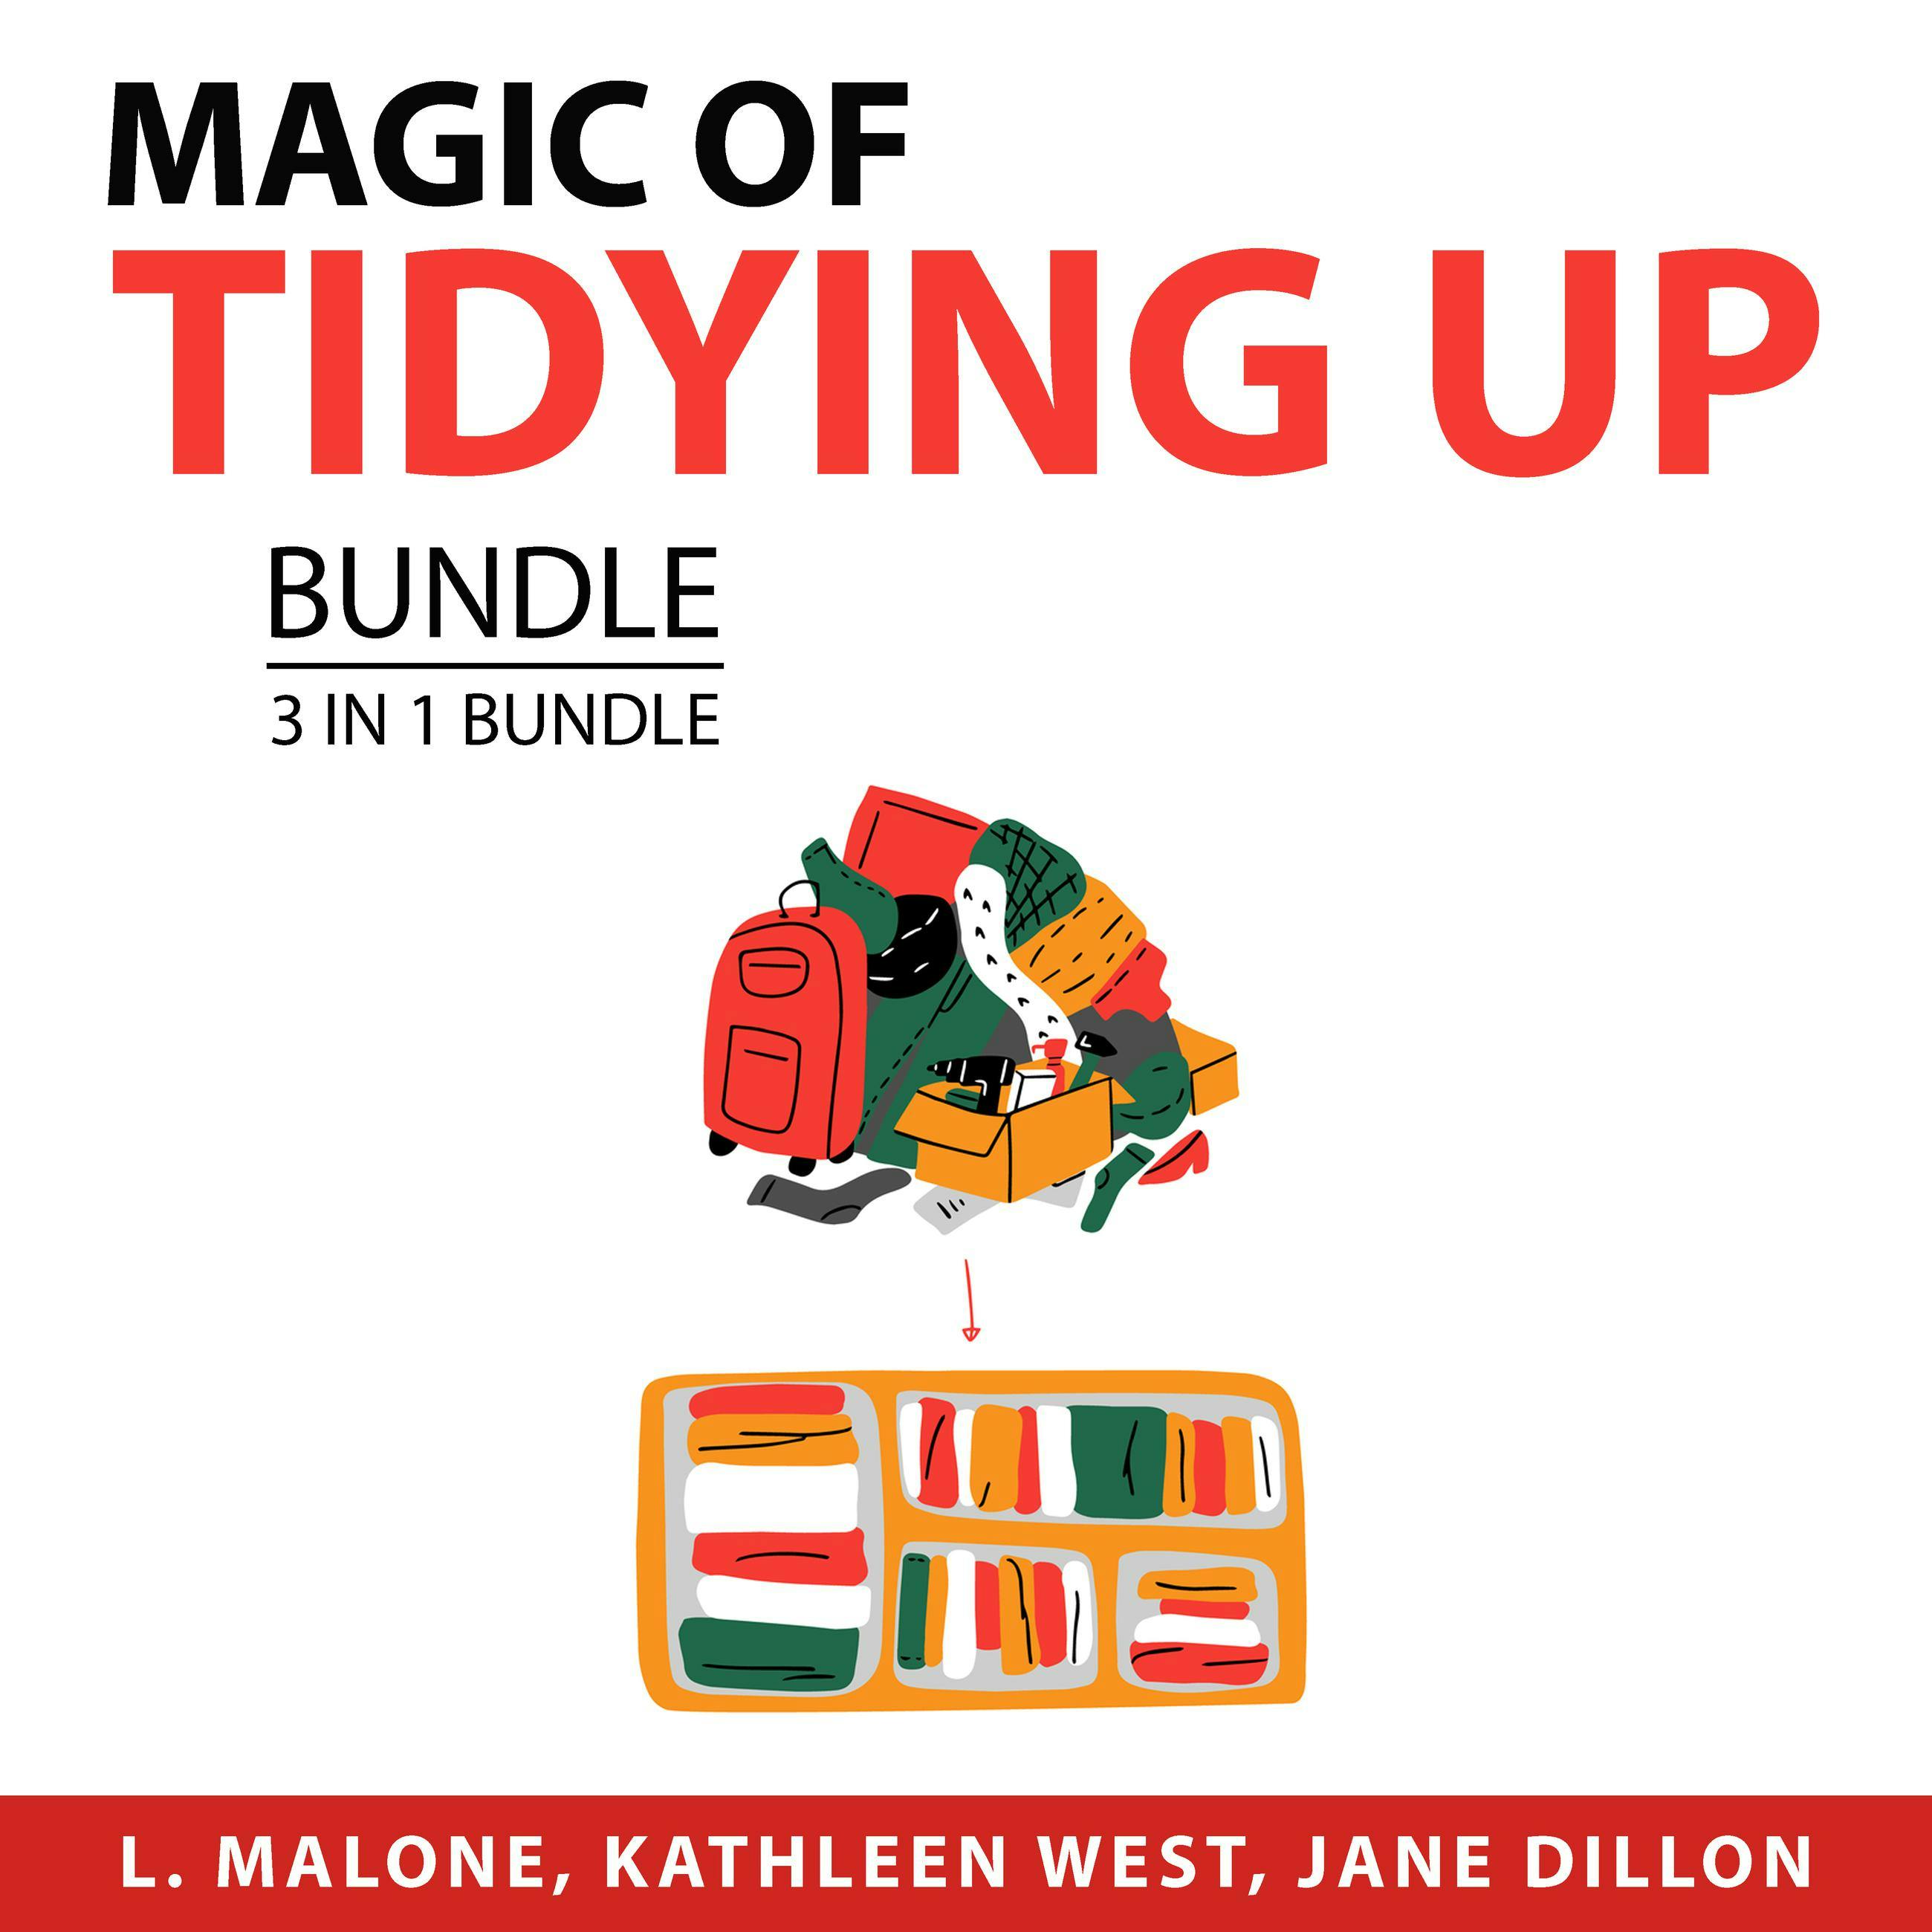 Magic of Tidying Up Bundle, 3 in 1 Bundle: Secrets to a Clean and Organized Home, Ultimate Organization Tips, and Declutter and Organize Your Home - undefined